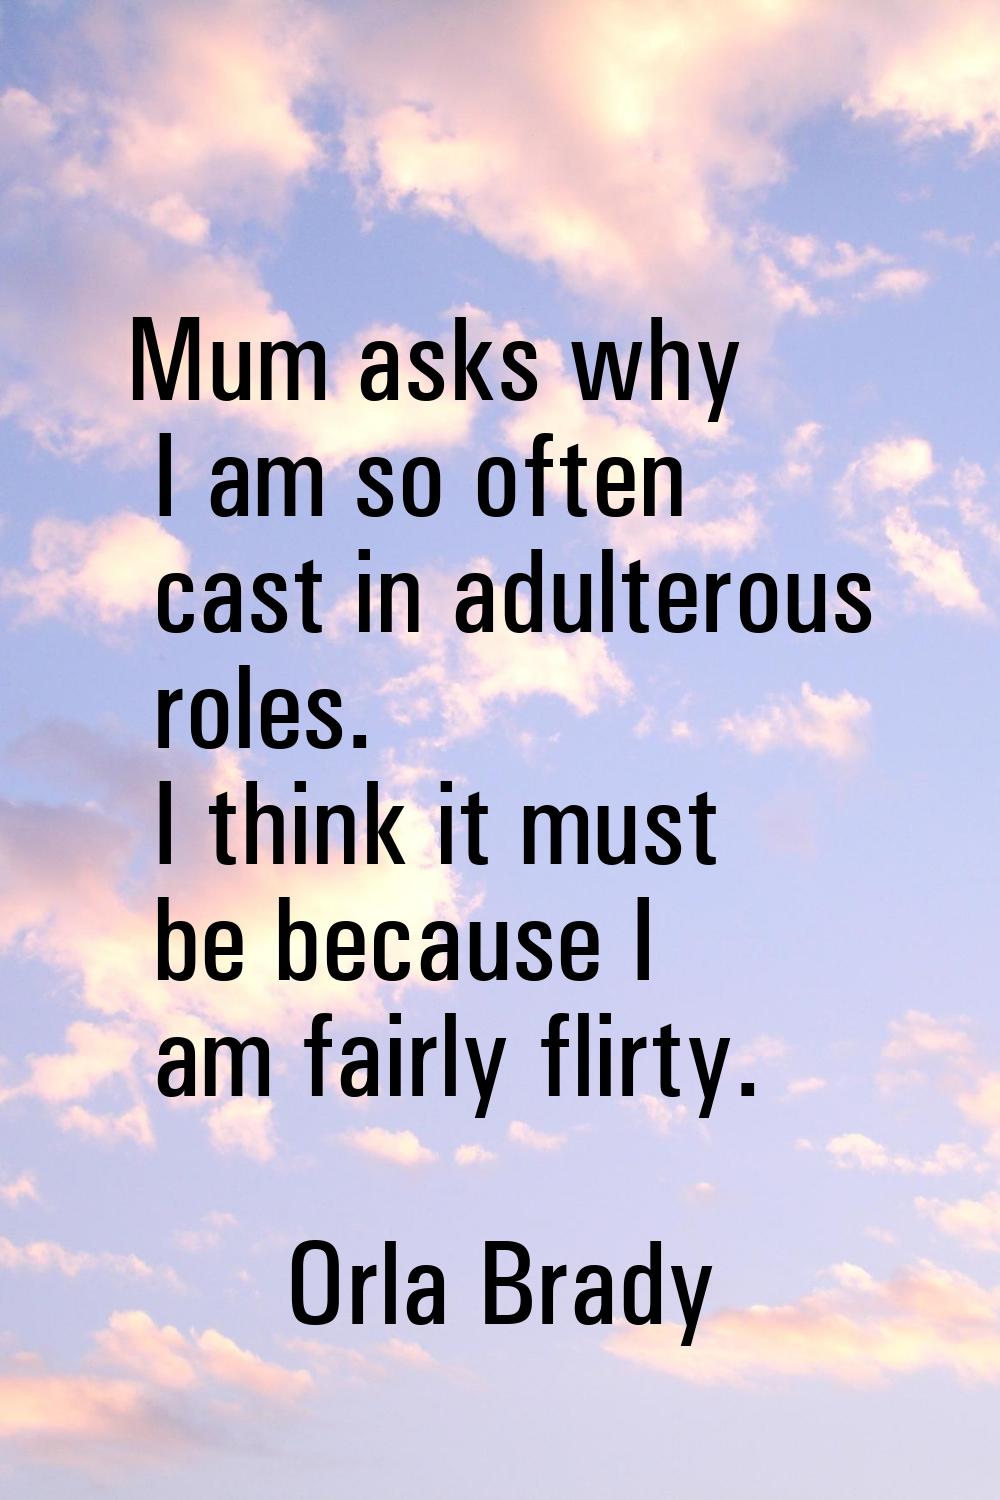 Mum asks why I am so often cast in adulterous roles. I think it must be because I am fairly flirty.